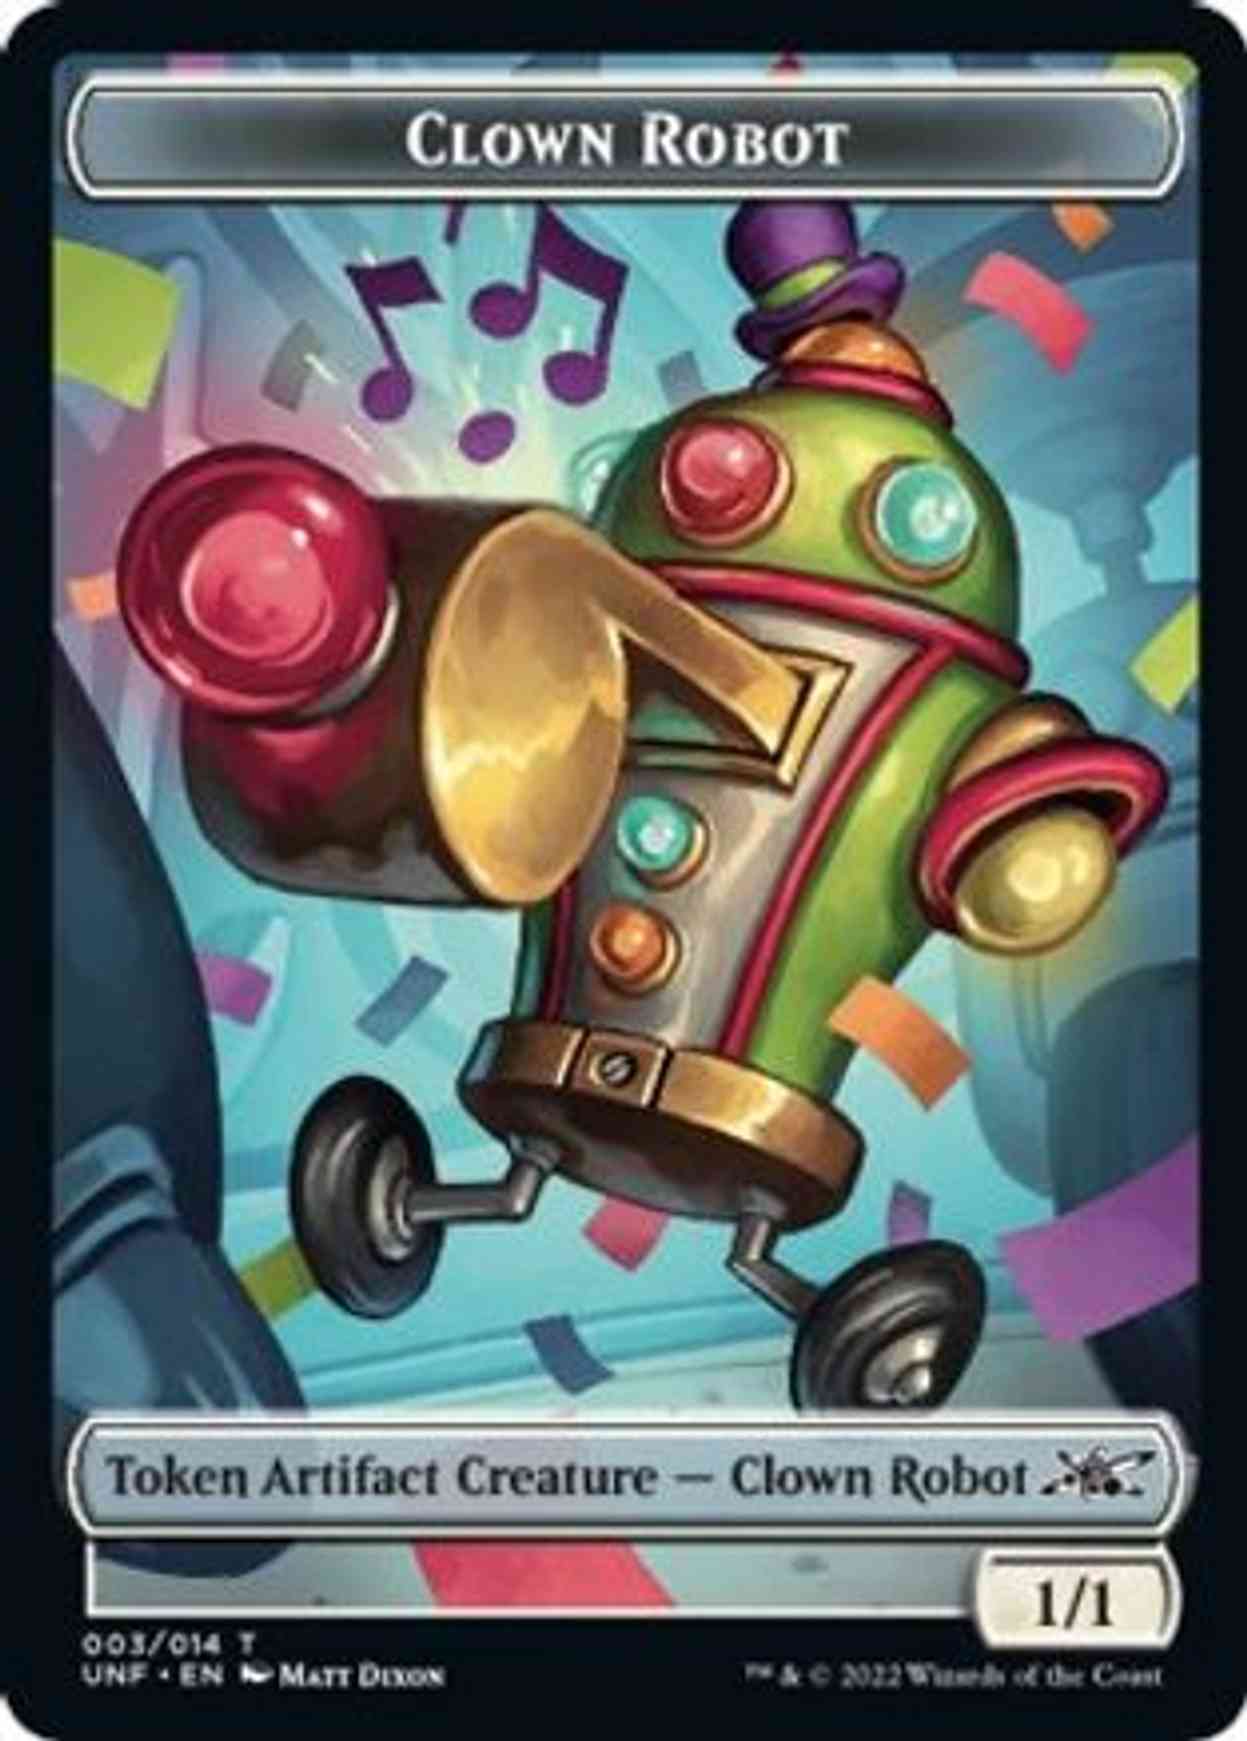 Clown Robot (003) // Food (010) Double-sided Token magic card front